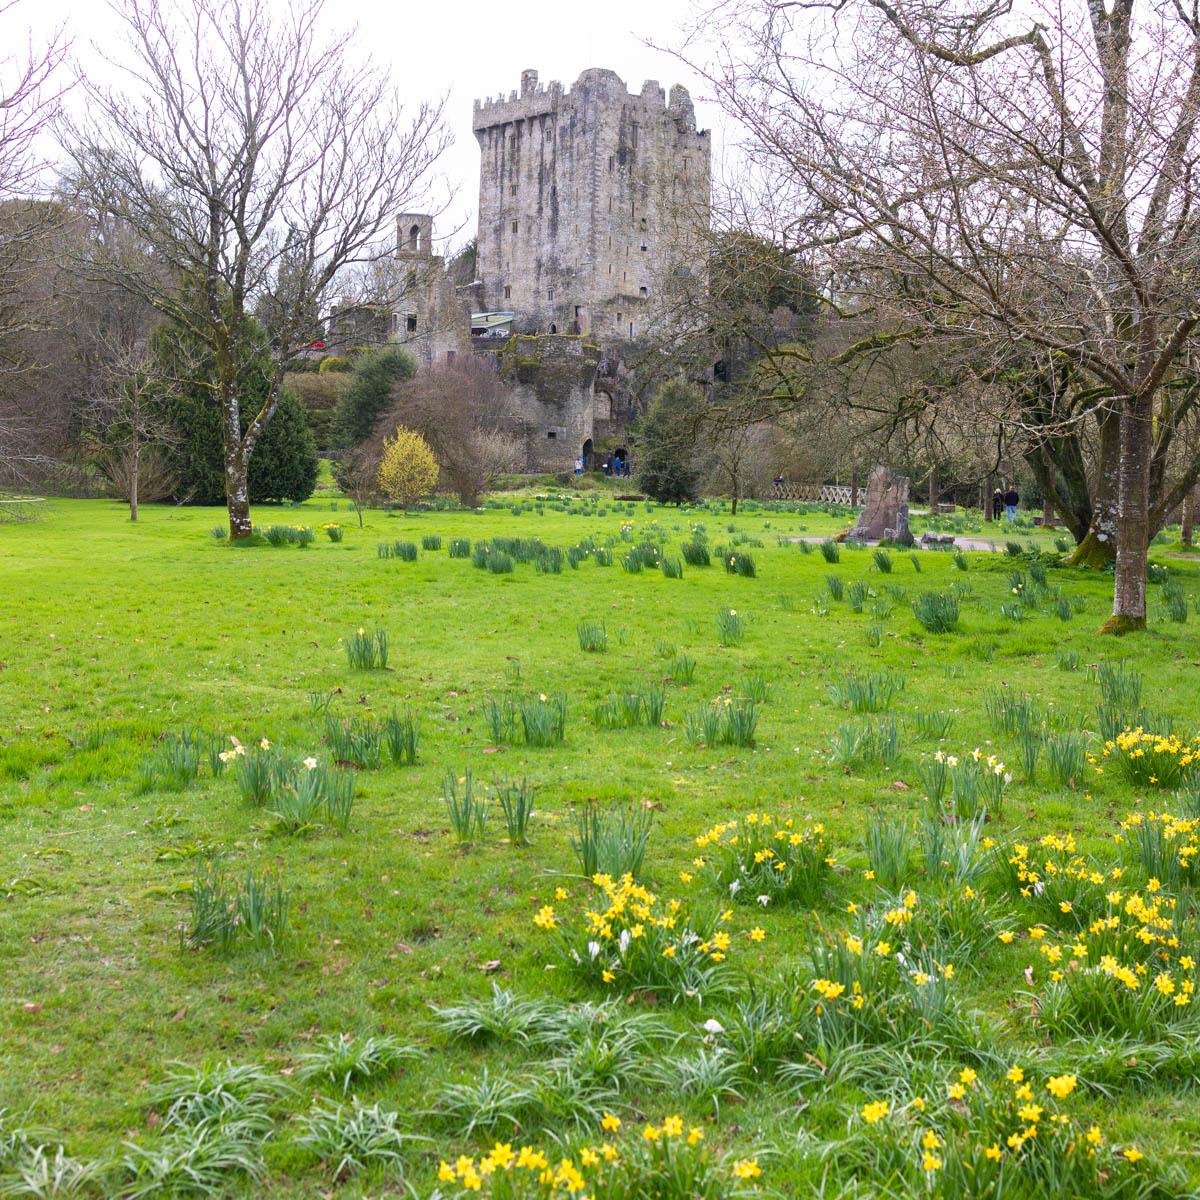 A green field of daffodils in front of a historic castle in Ireland.